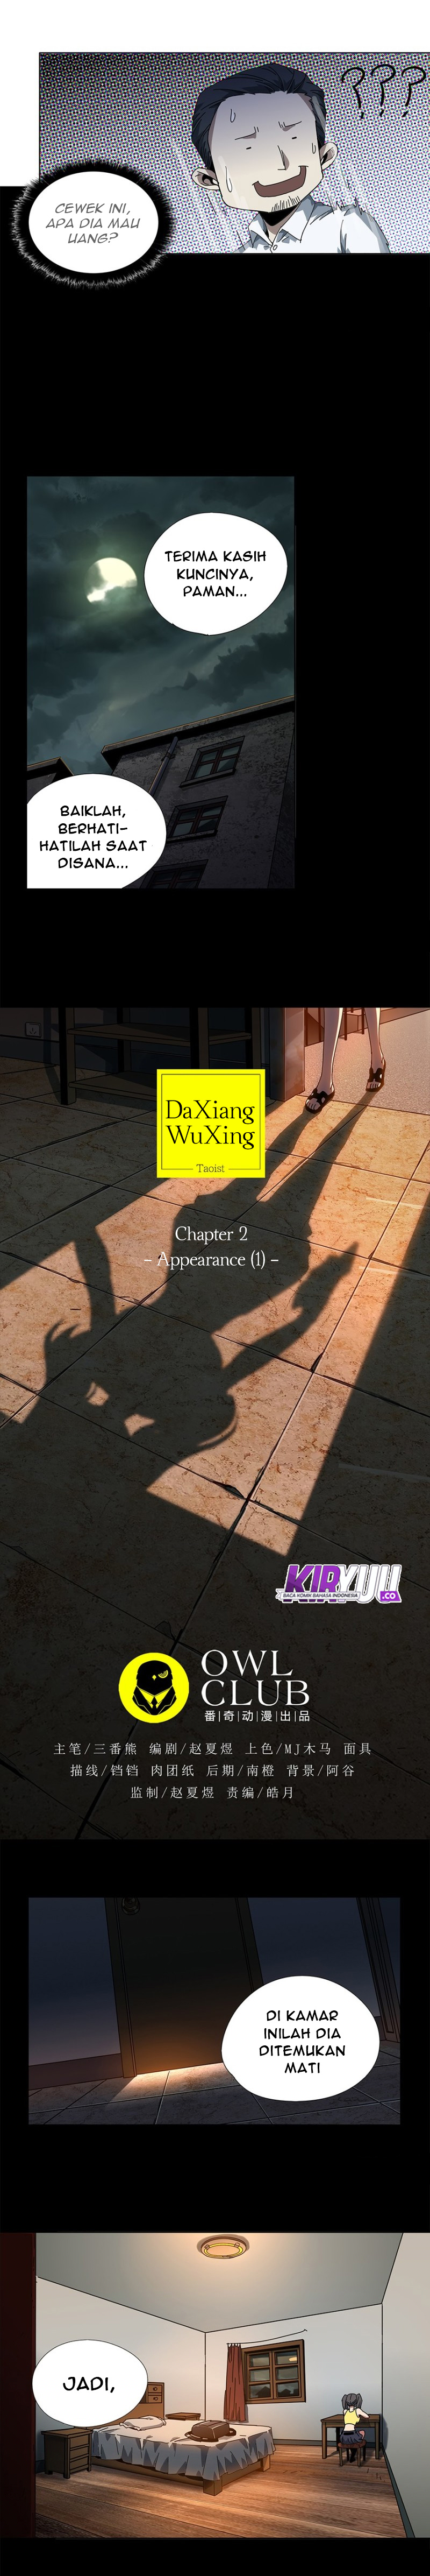 Elephant Invisible (Da Xiang Wuxing) Chapter 02